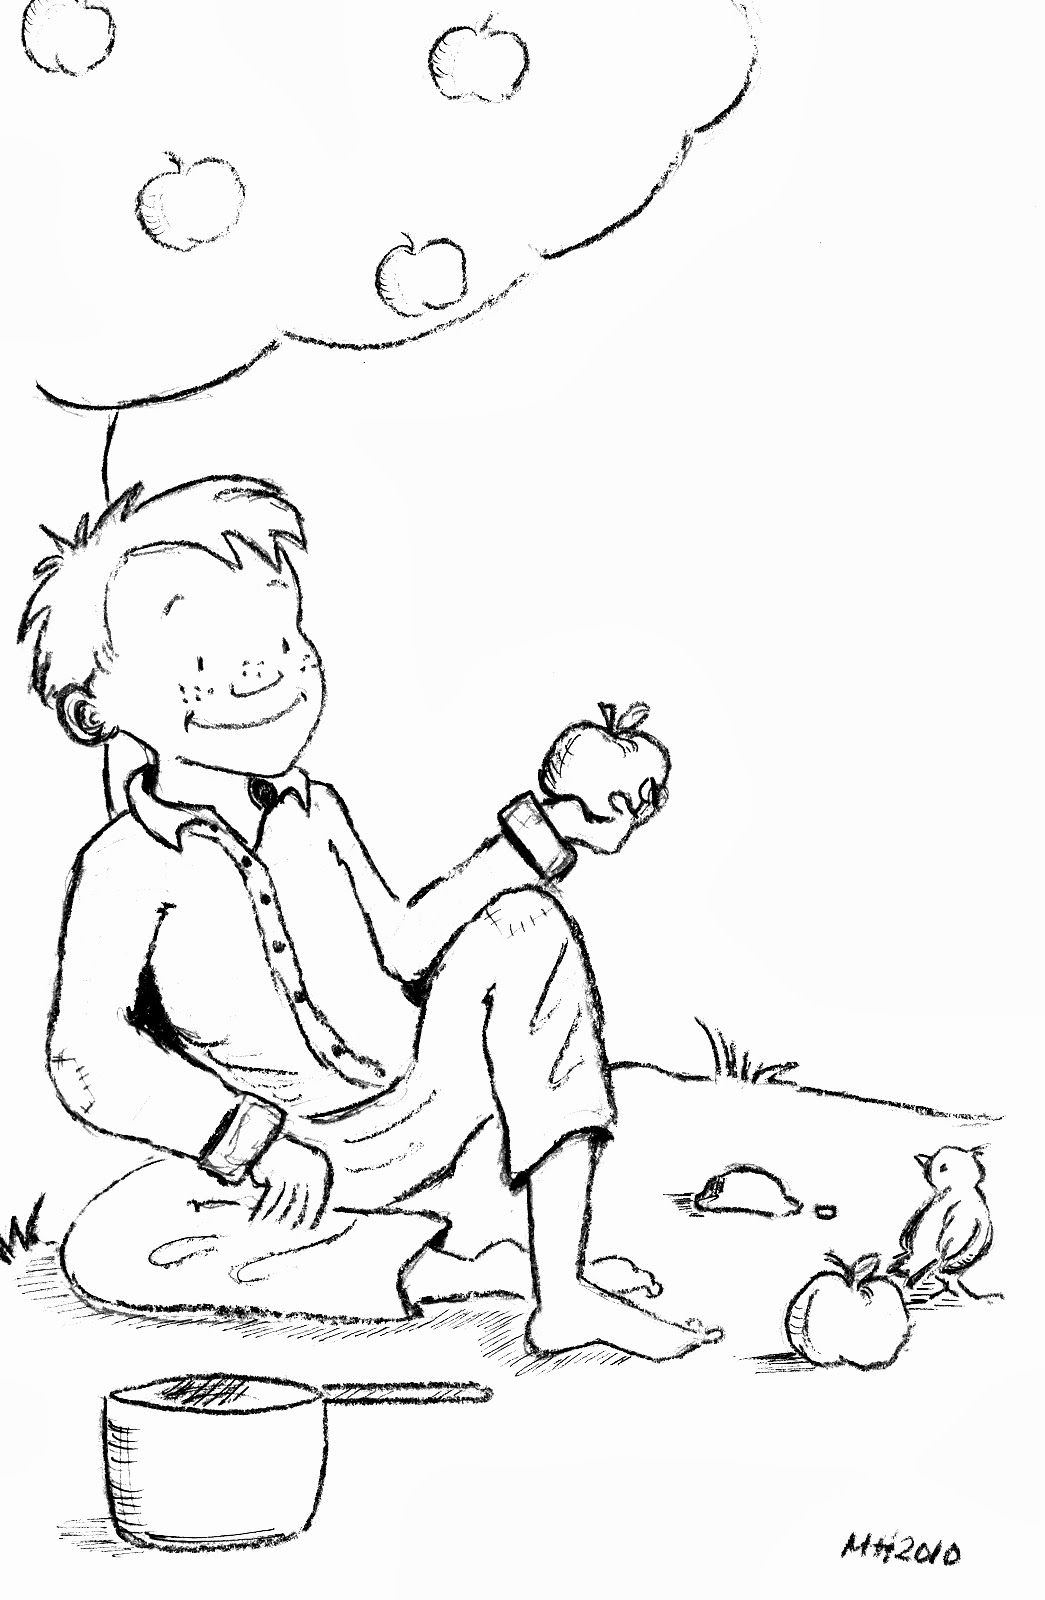 johnny-appleseed-coloring-pages-best-coloring-pages-for-kids